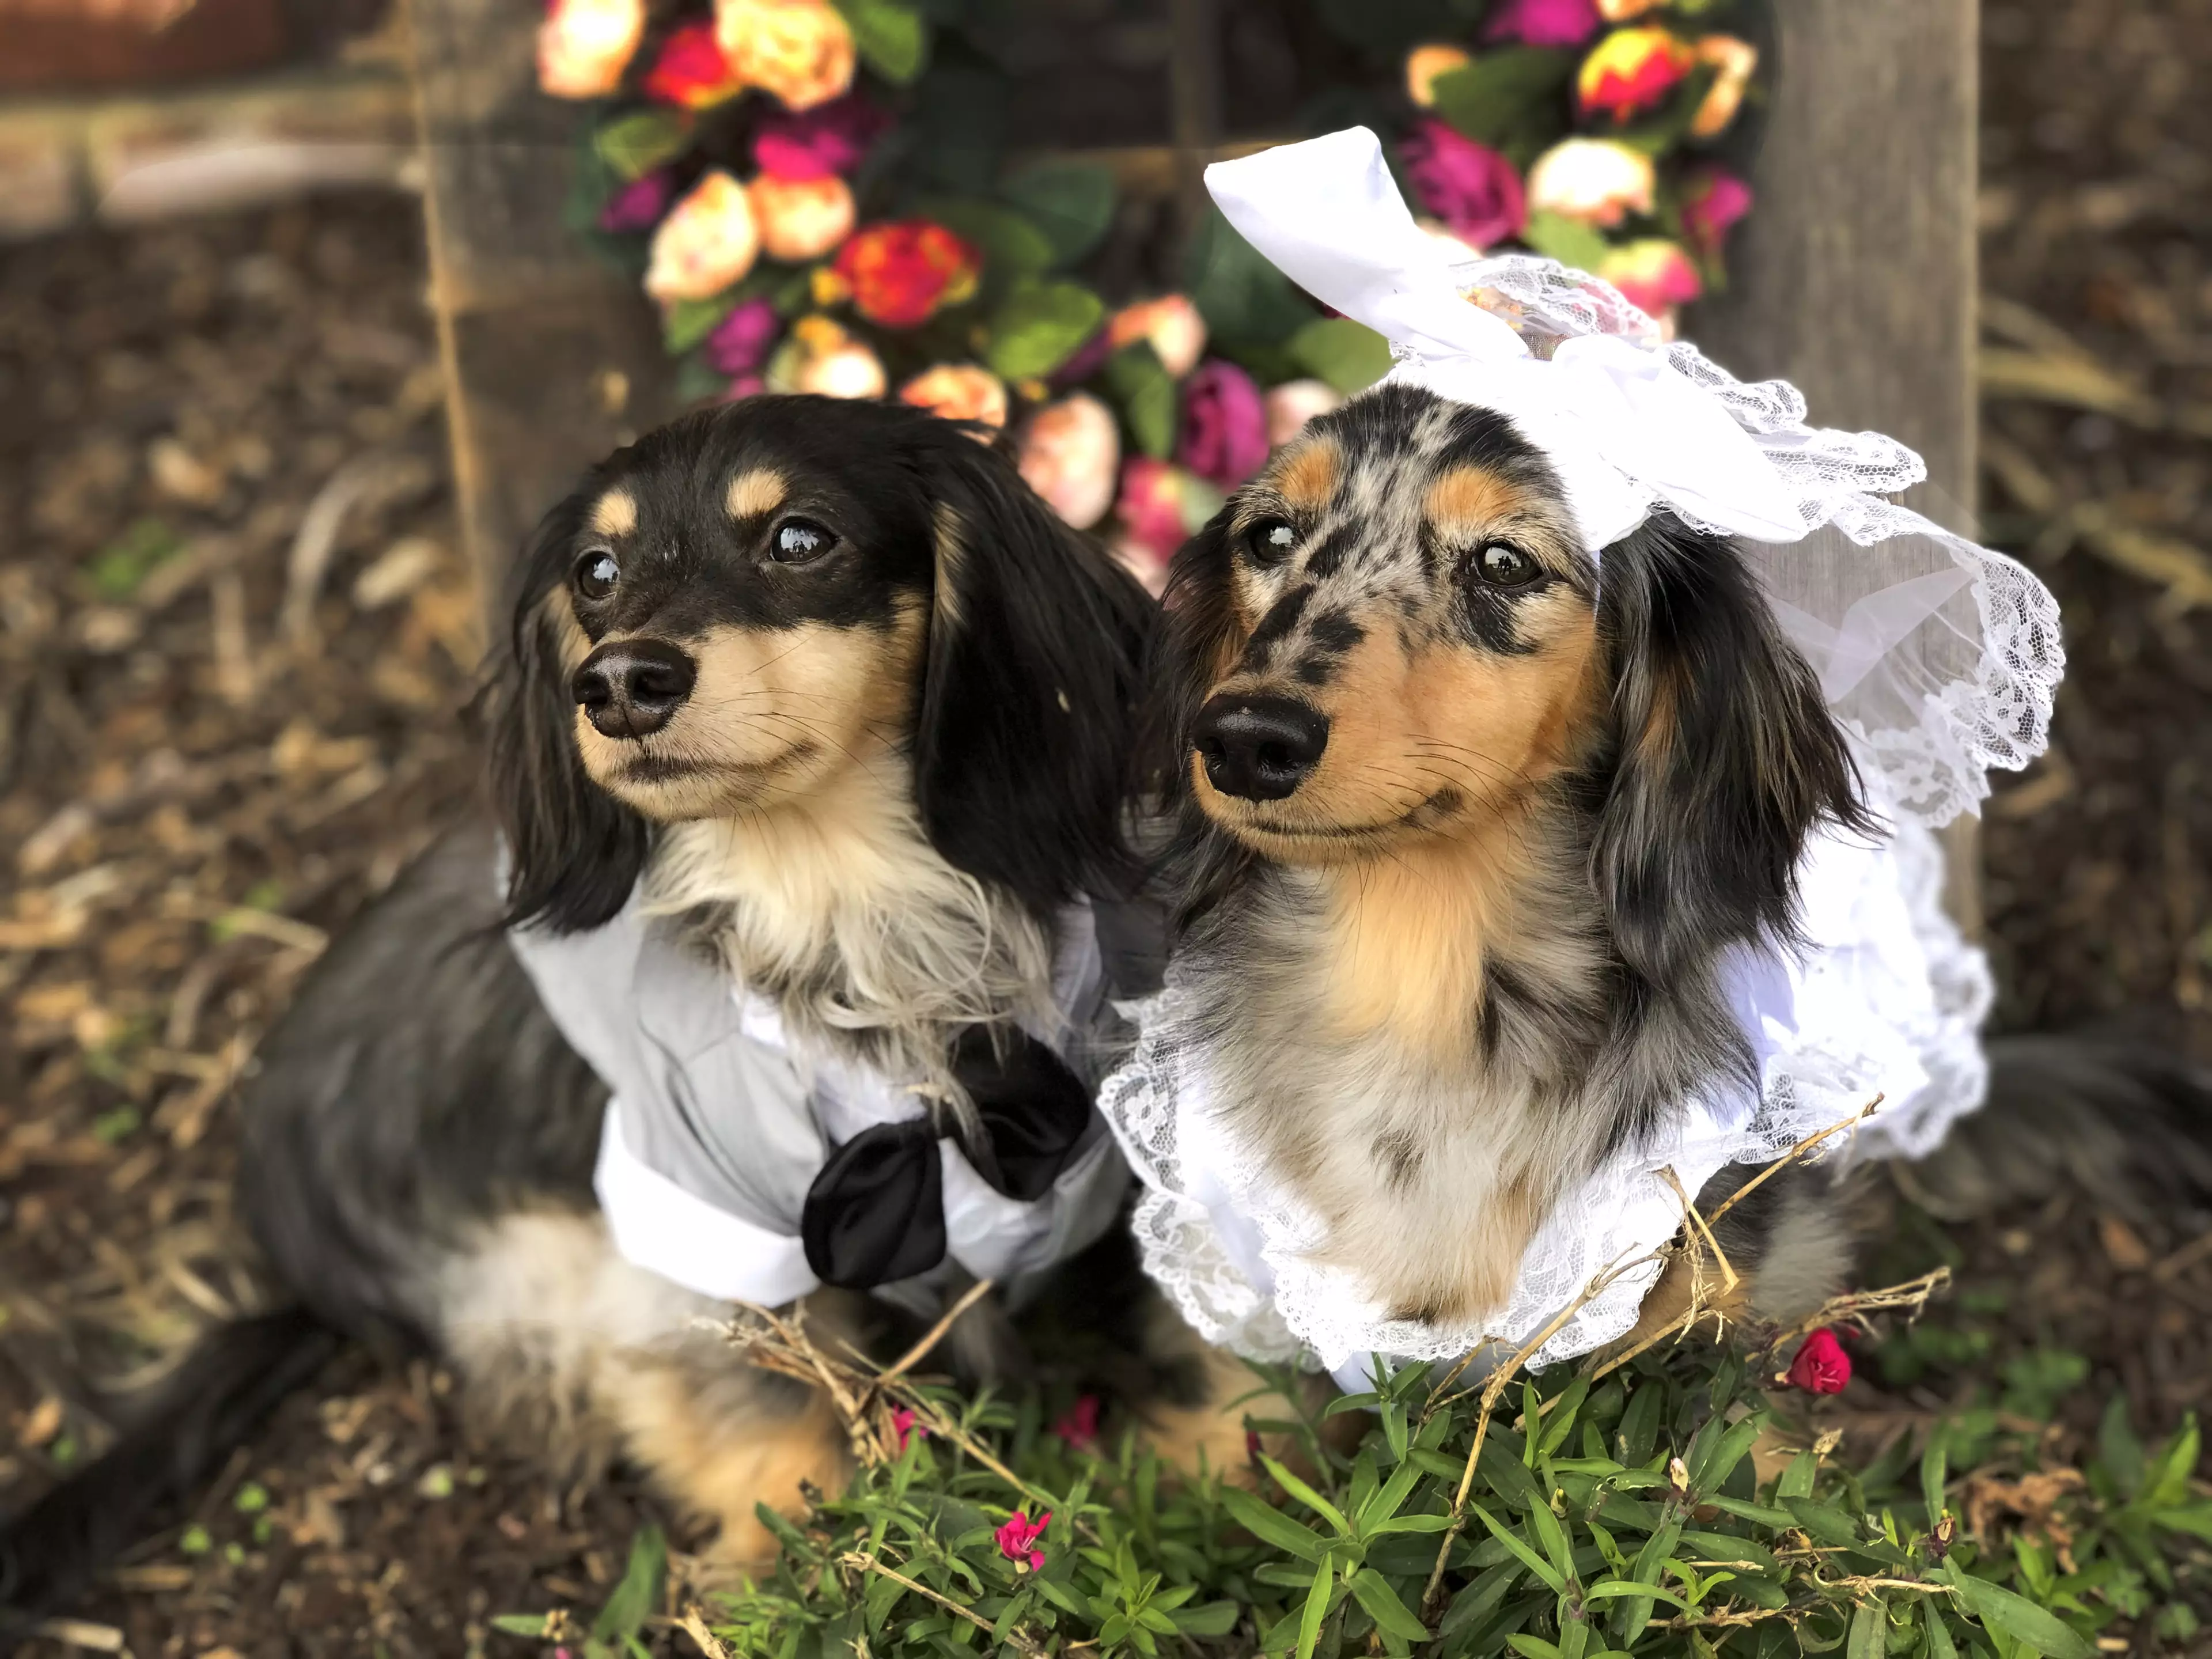 The cute pooches had outfits fit for the big day. (